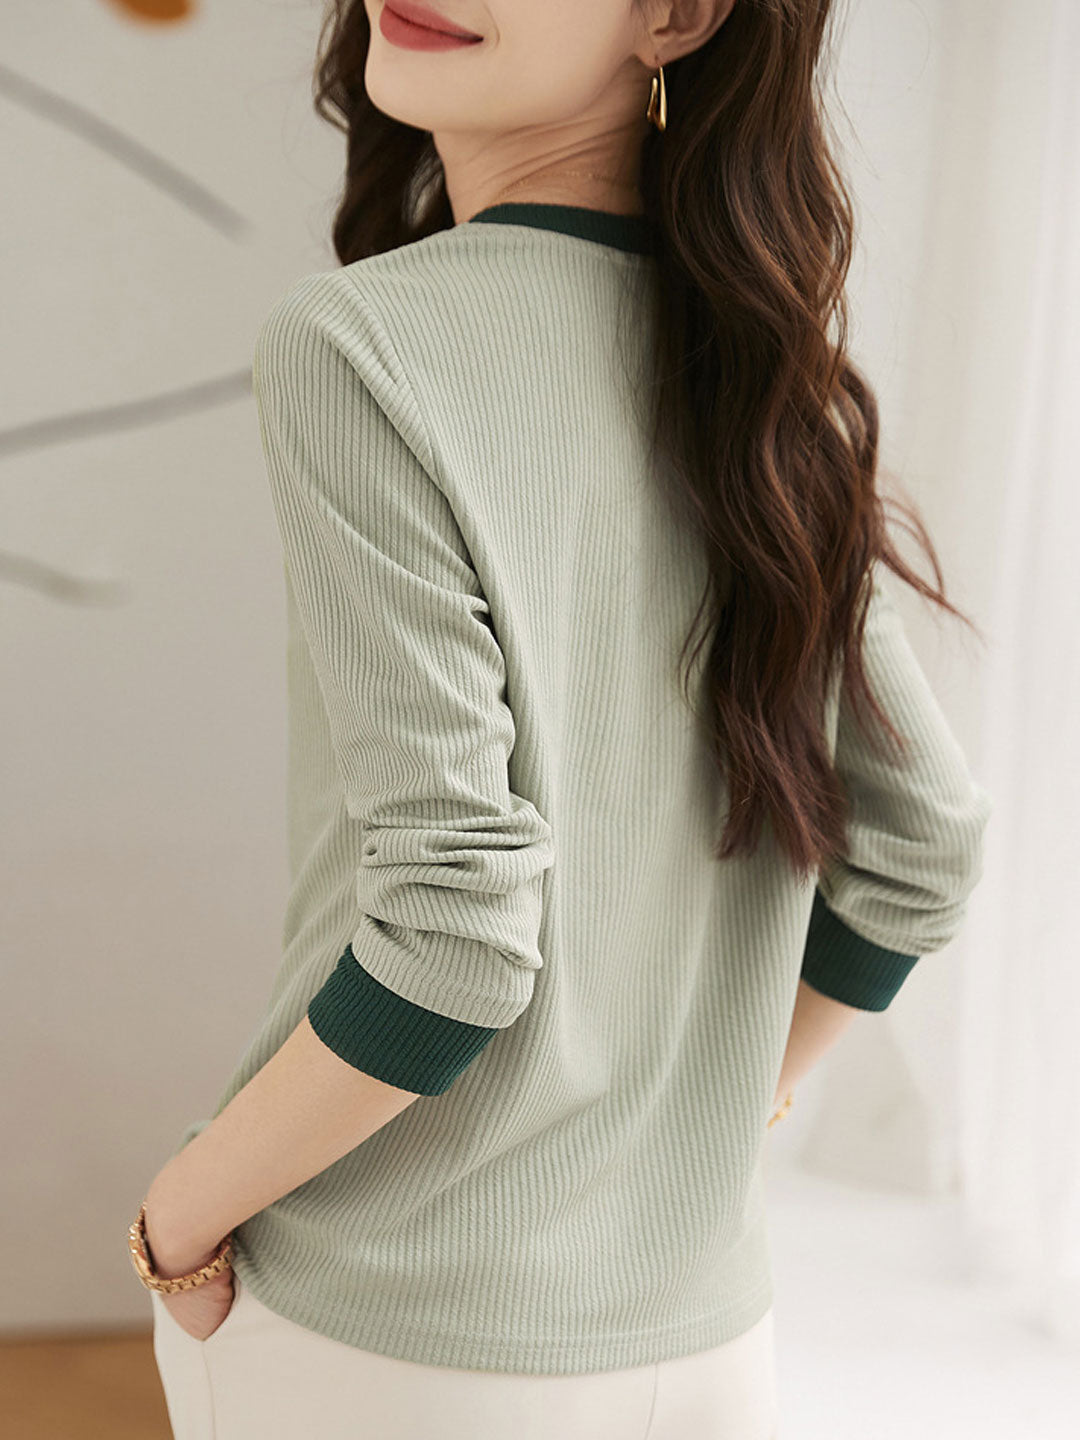 Sarah Classic V-Neck Color Matched Knitted Top